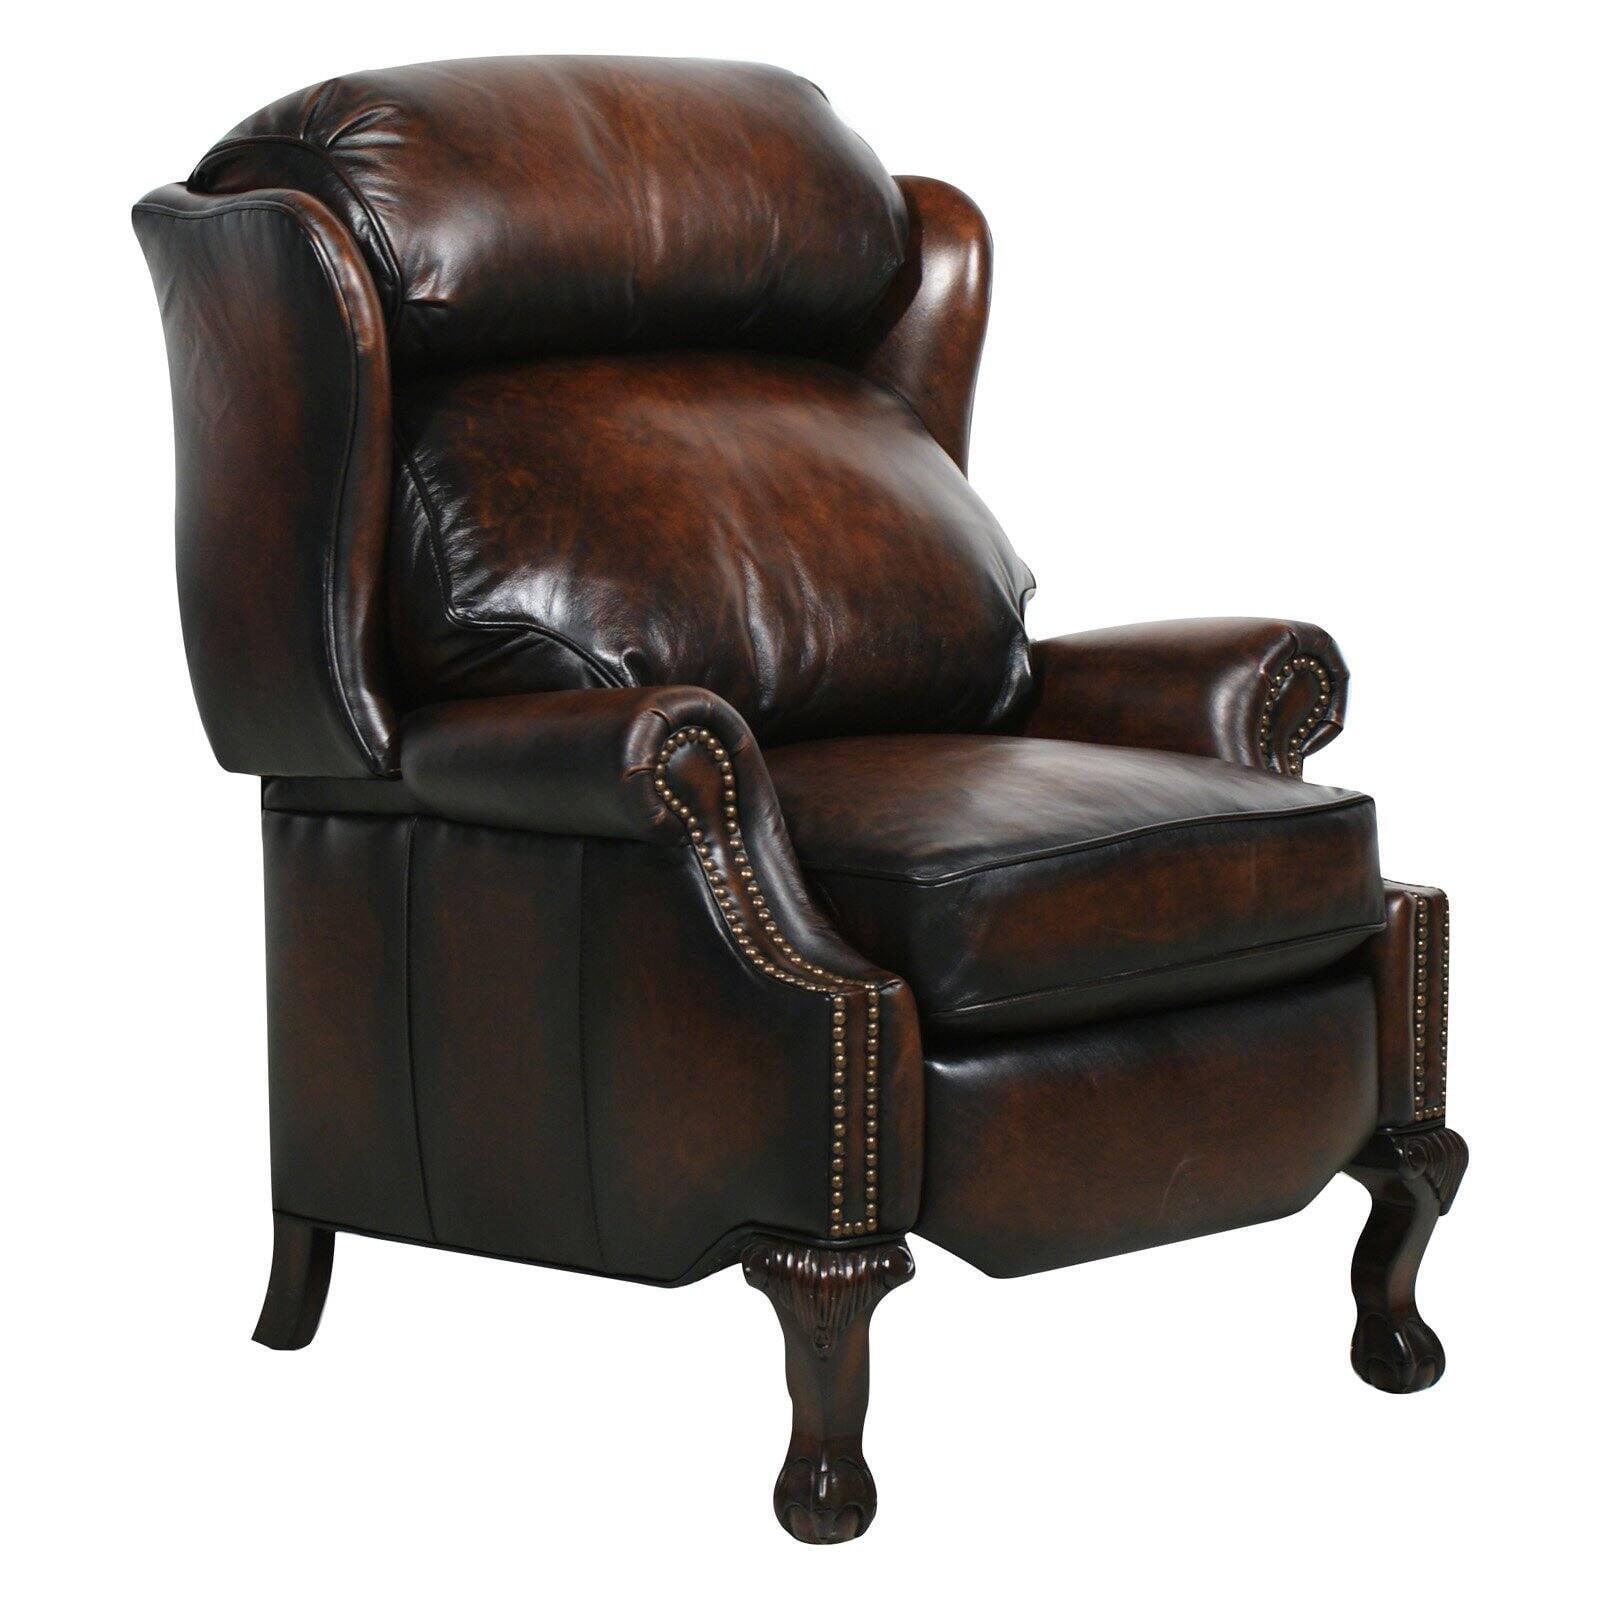 Danbury Traditional Blue Leather Recliner with Wood Claw Legs